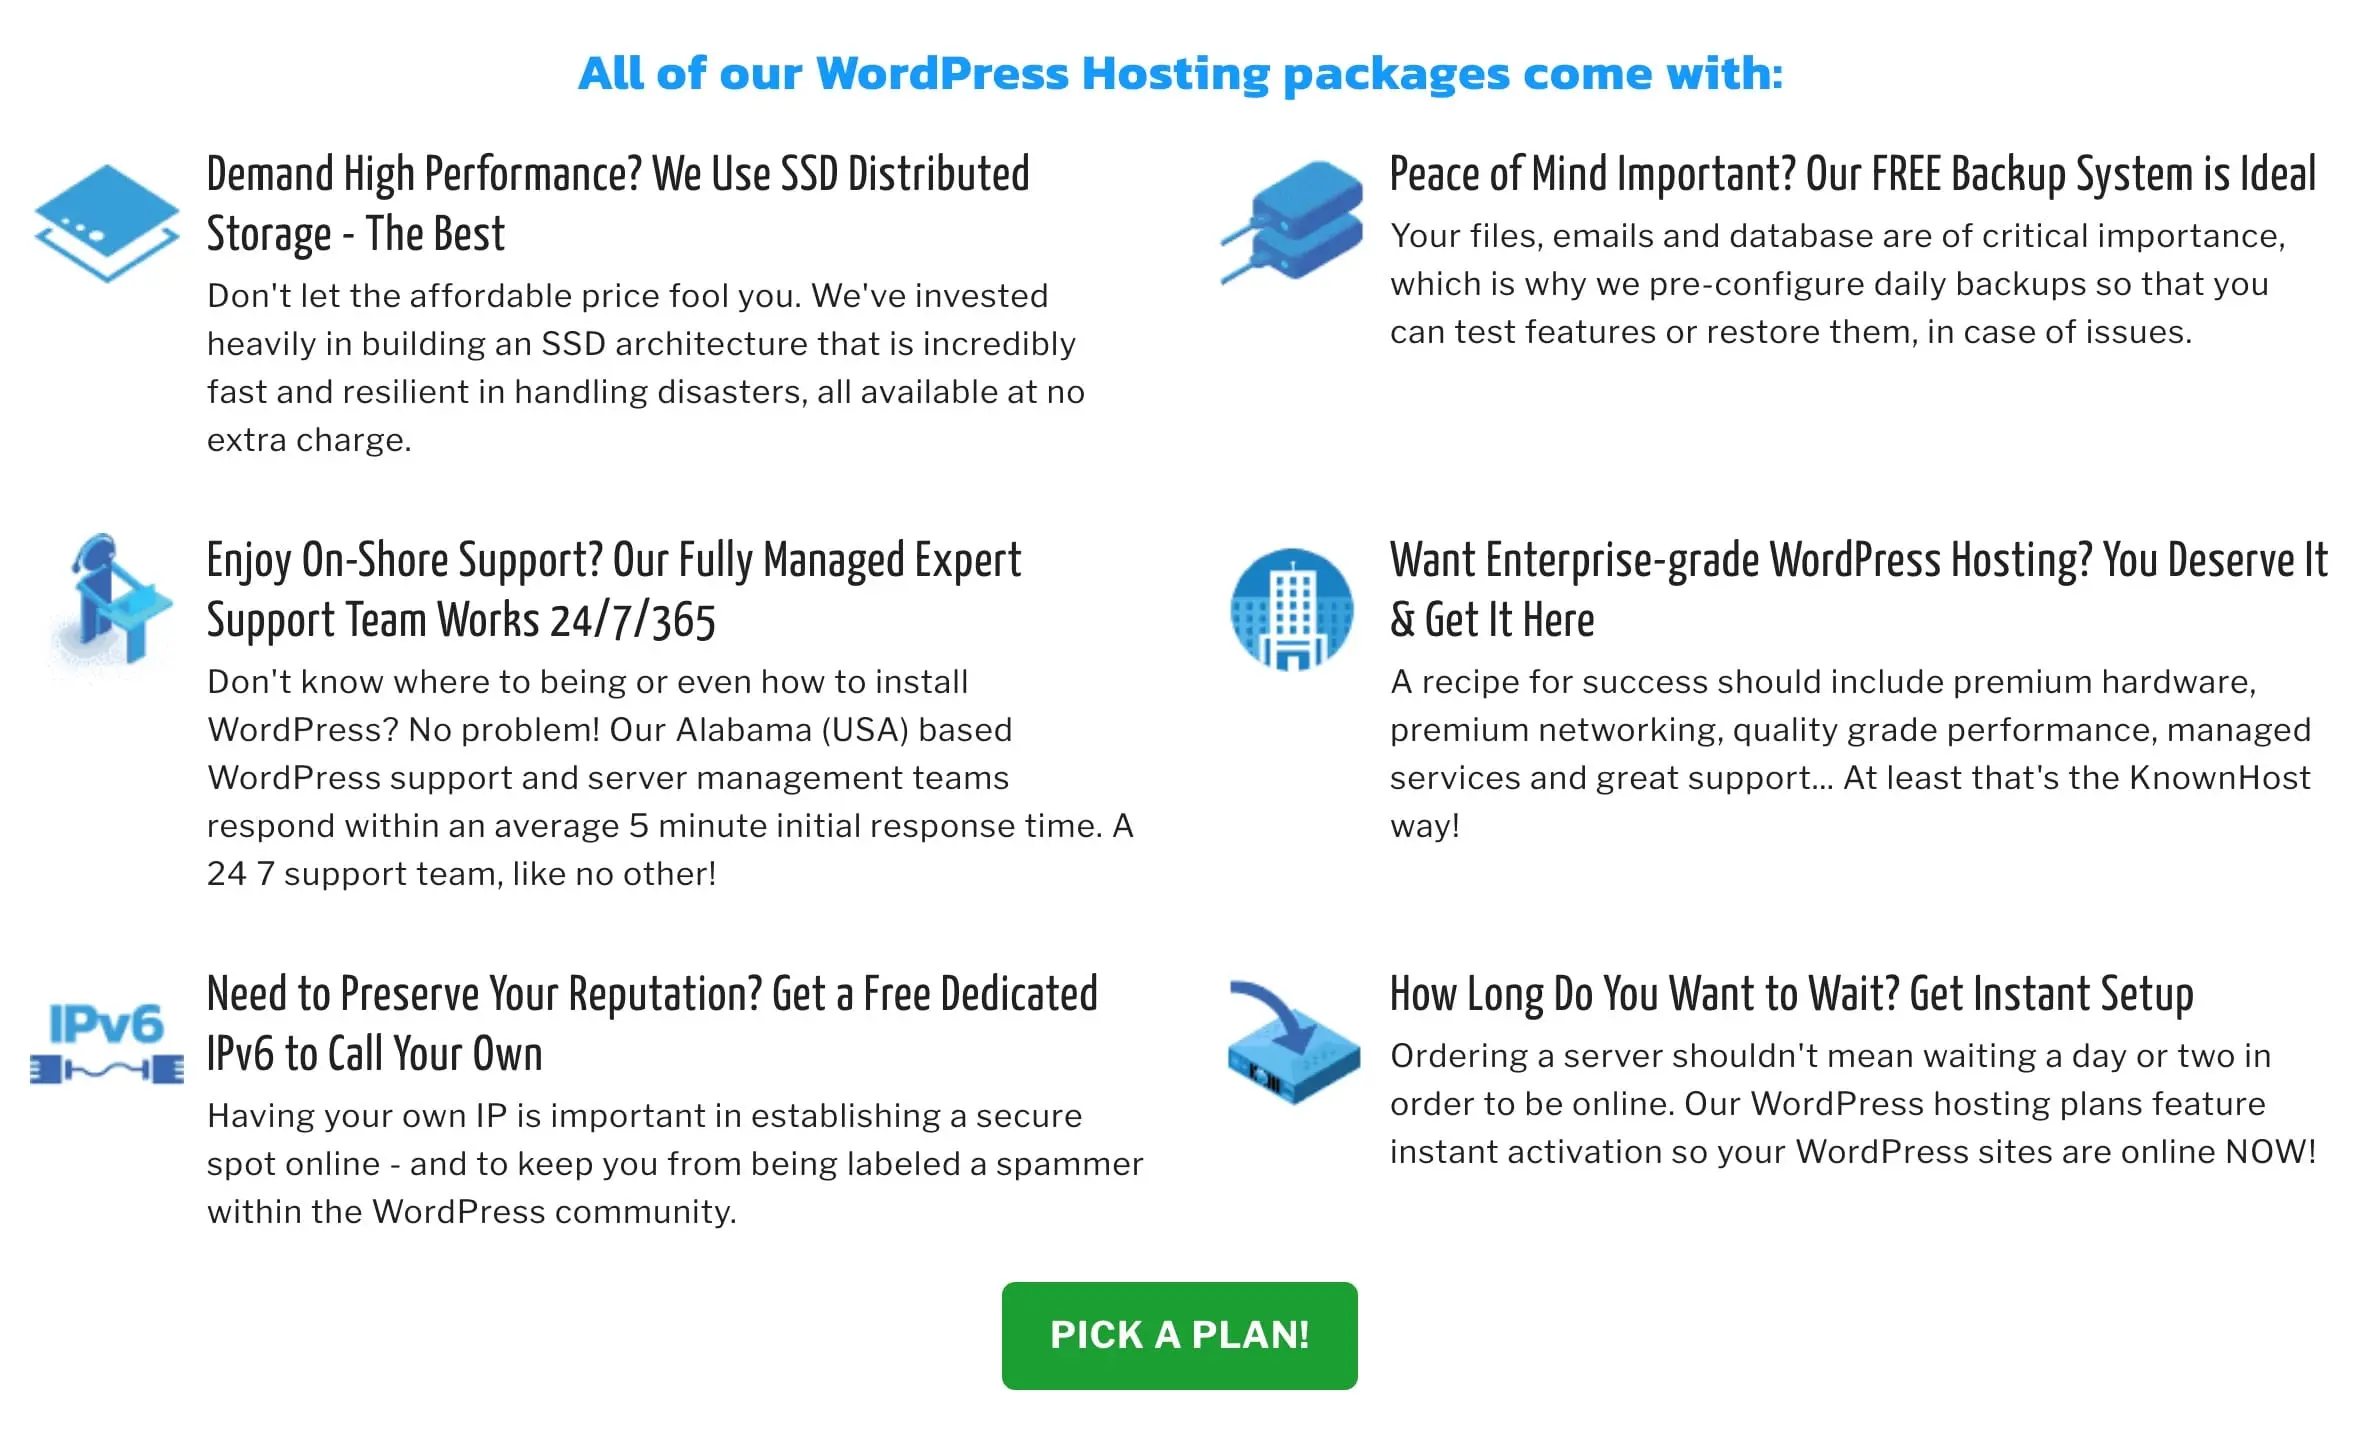 Knownhost Managed Hosting Services.